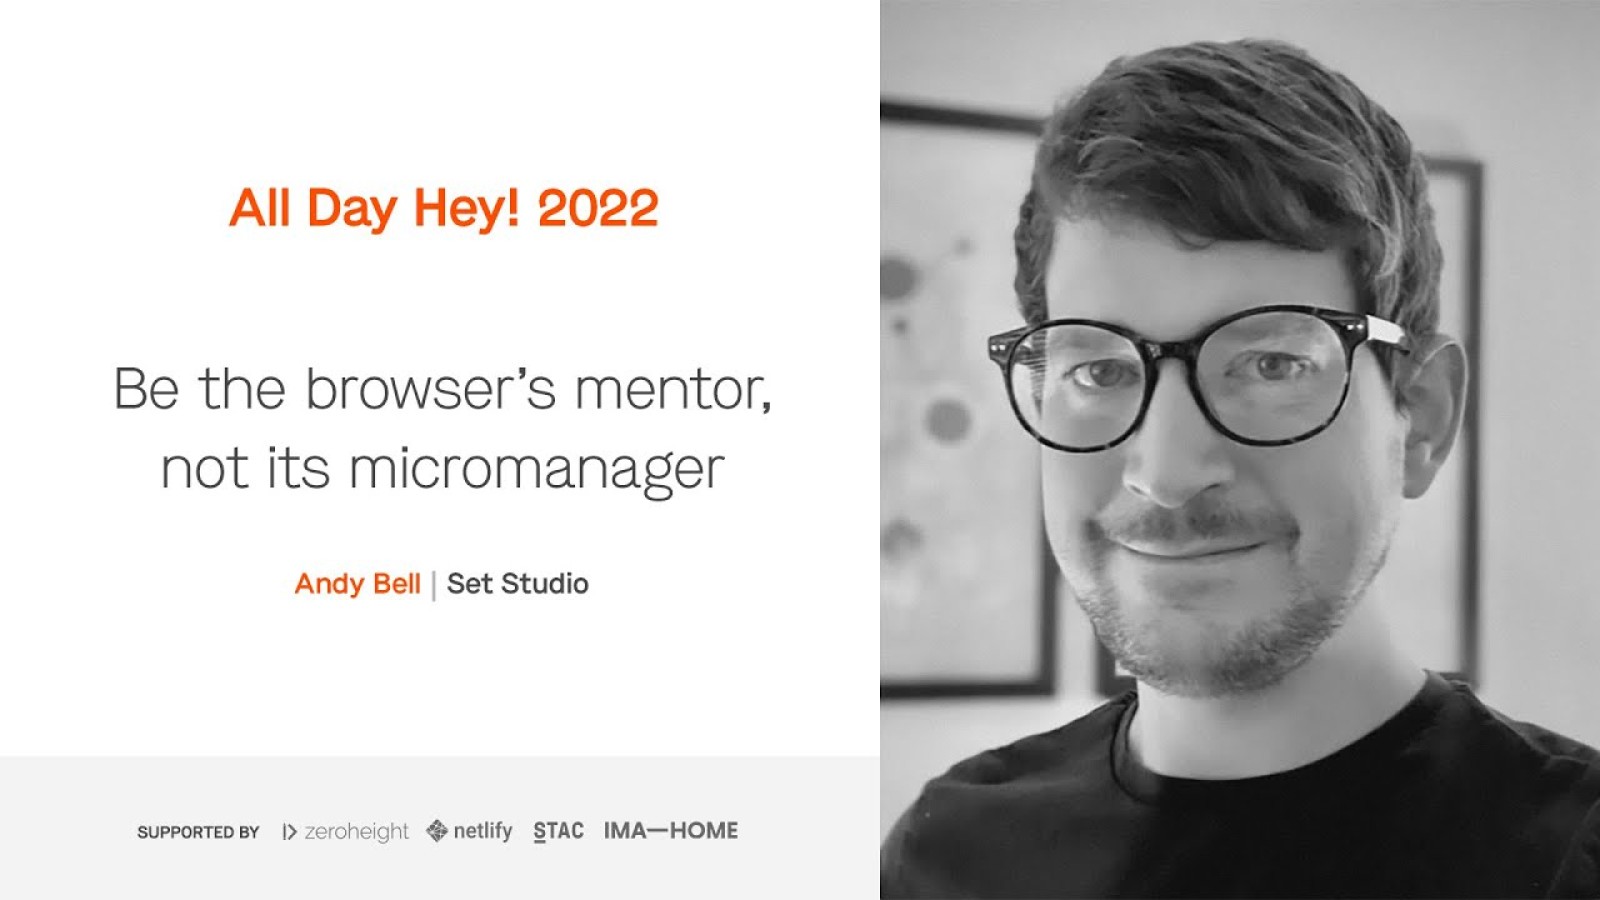 Be the browser’s mentor, not its micromanager